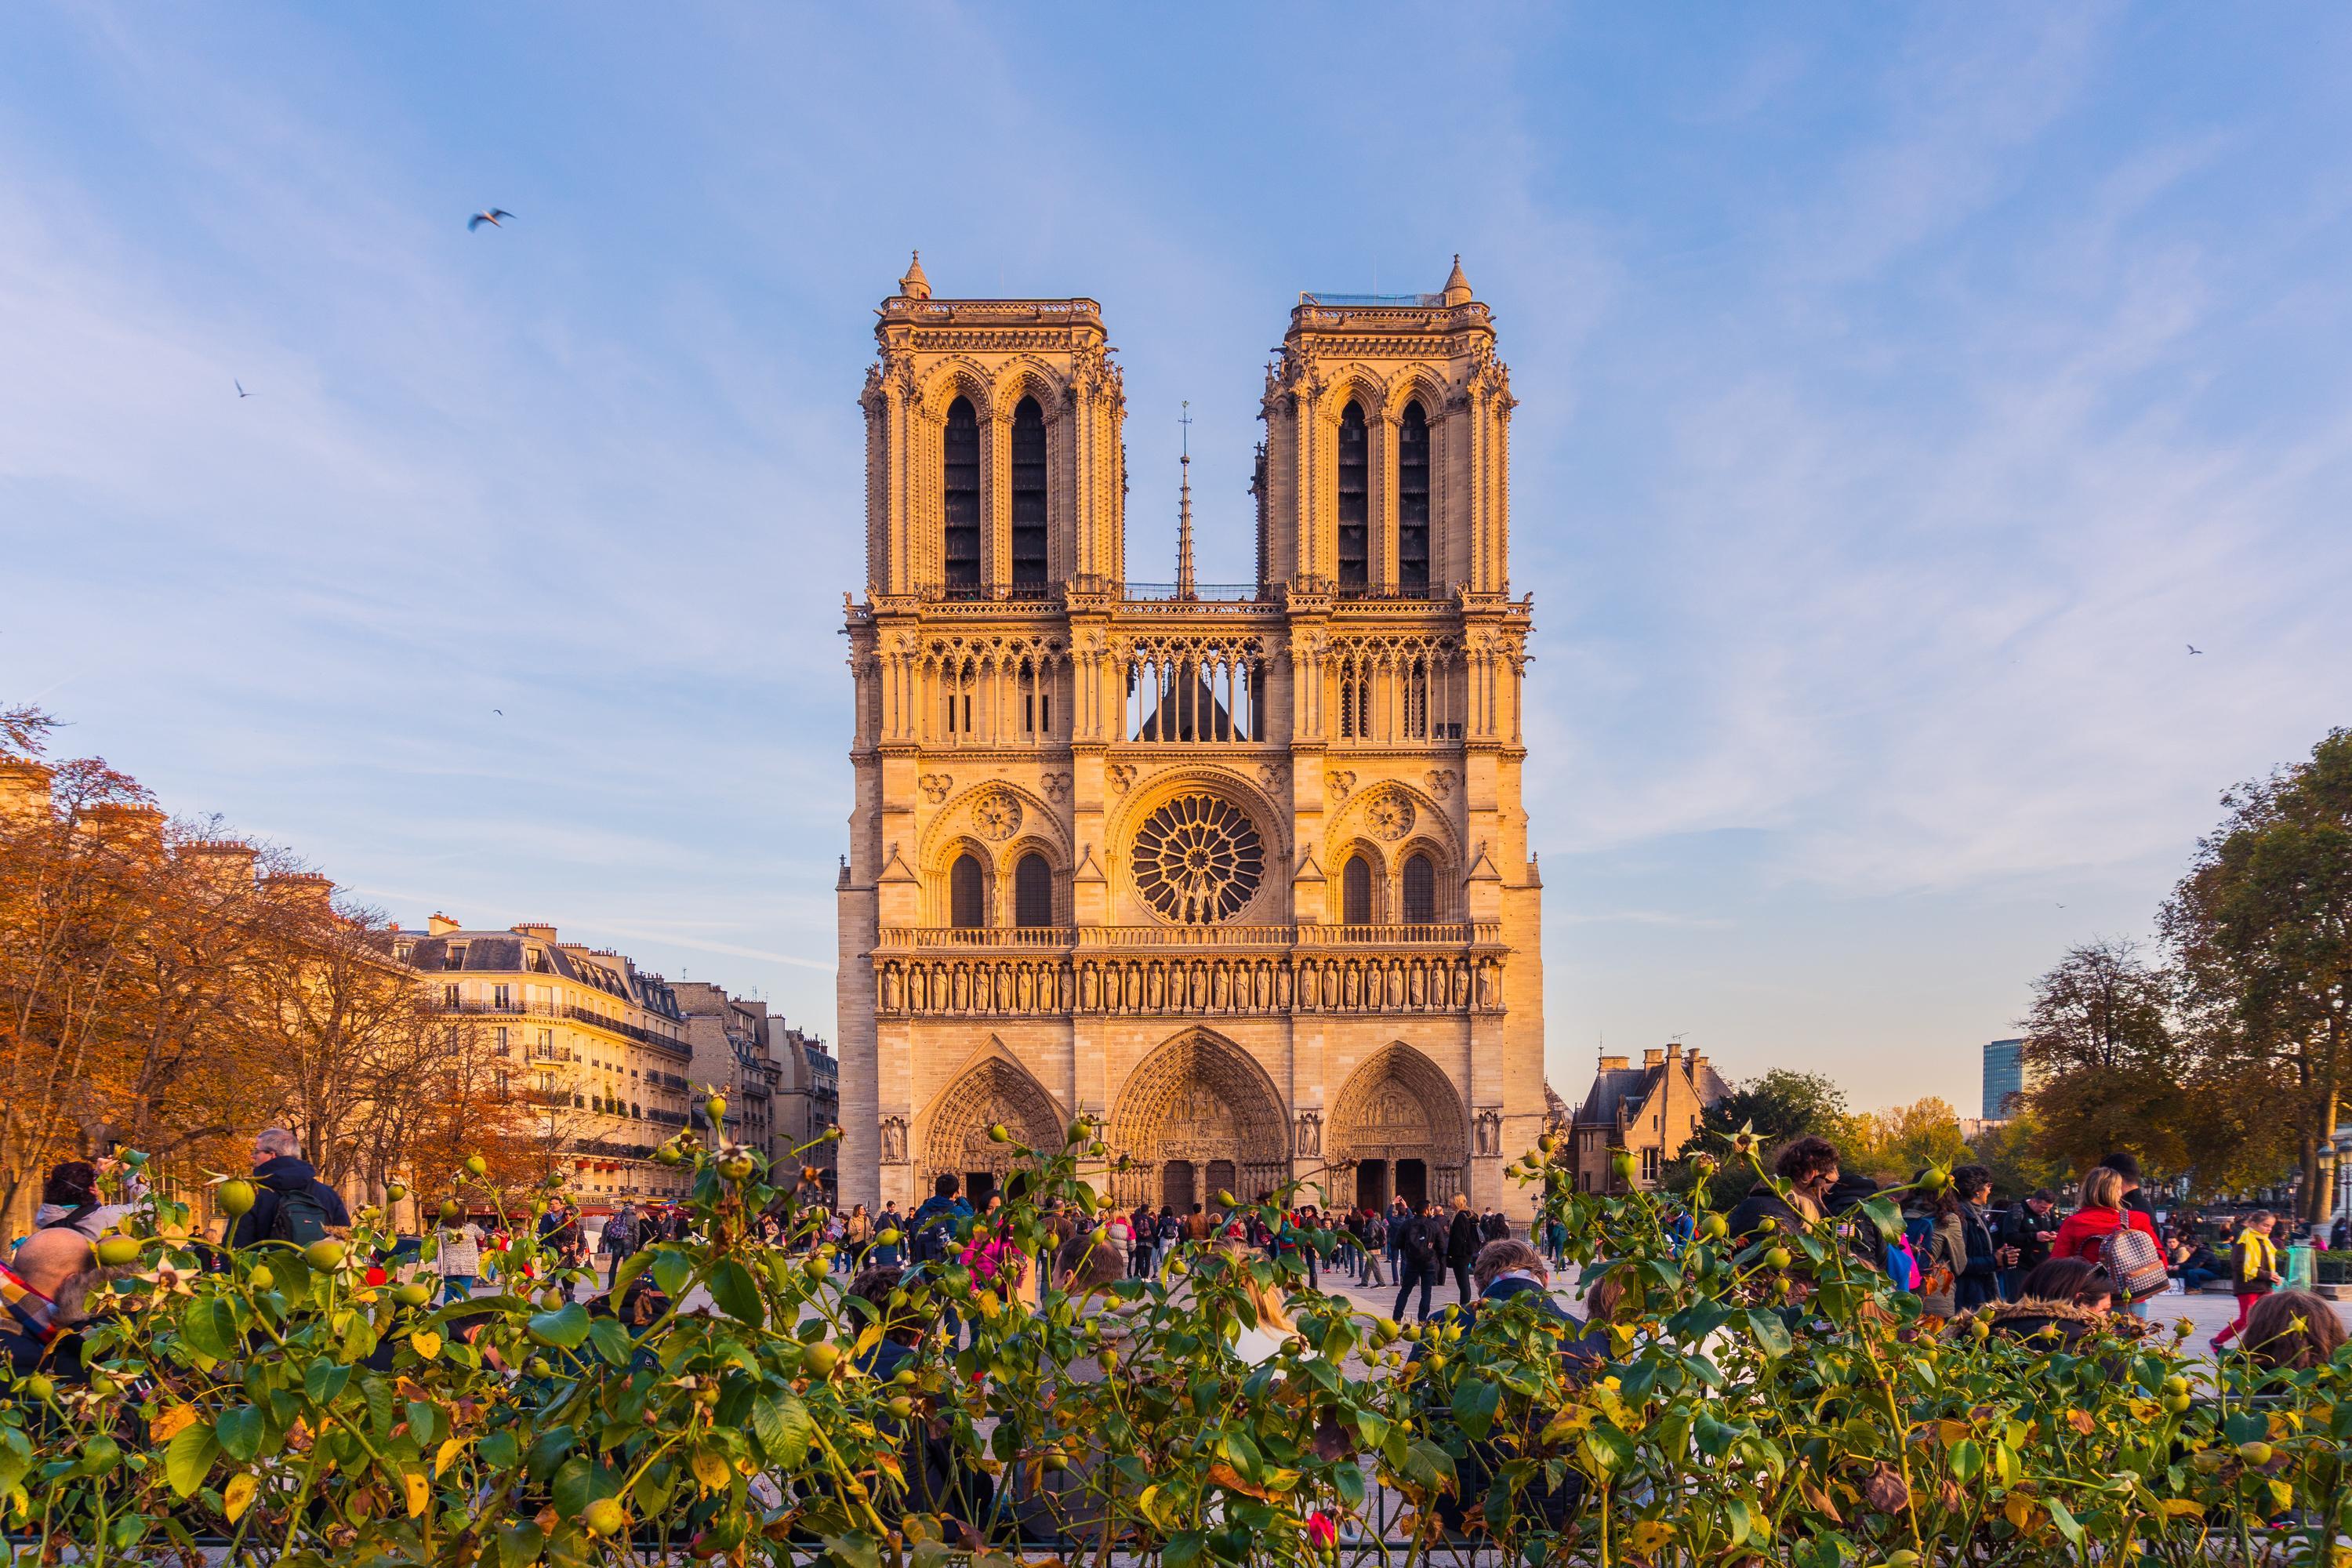 Things You Shouldn't Miss while Visiting the Notre Dame By David